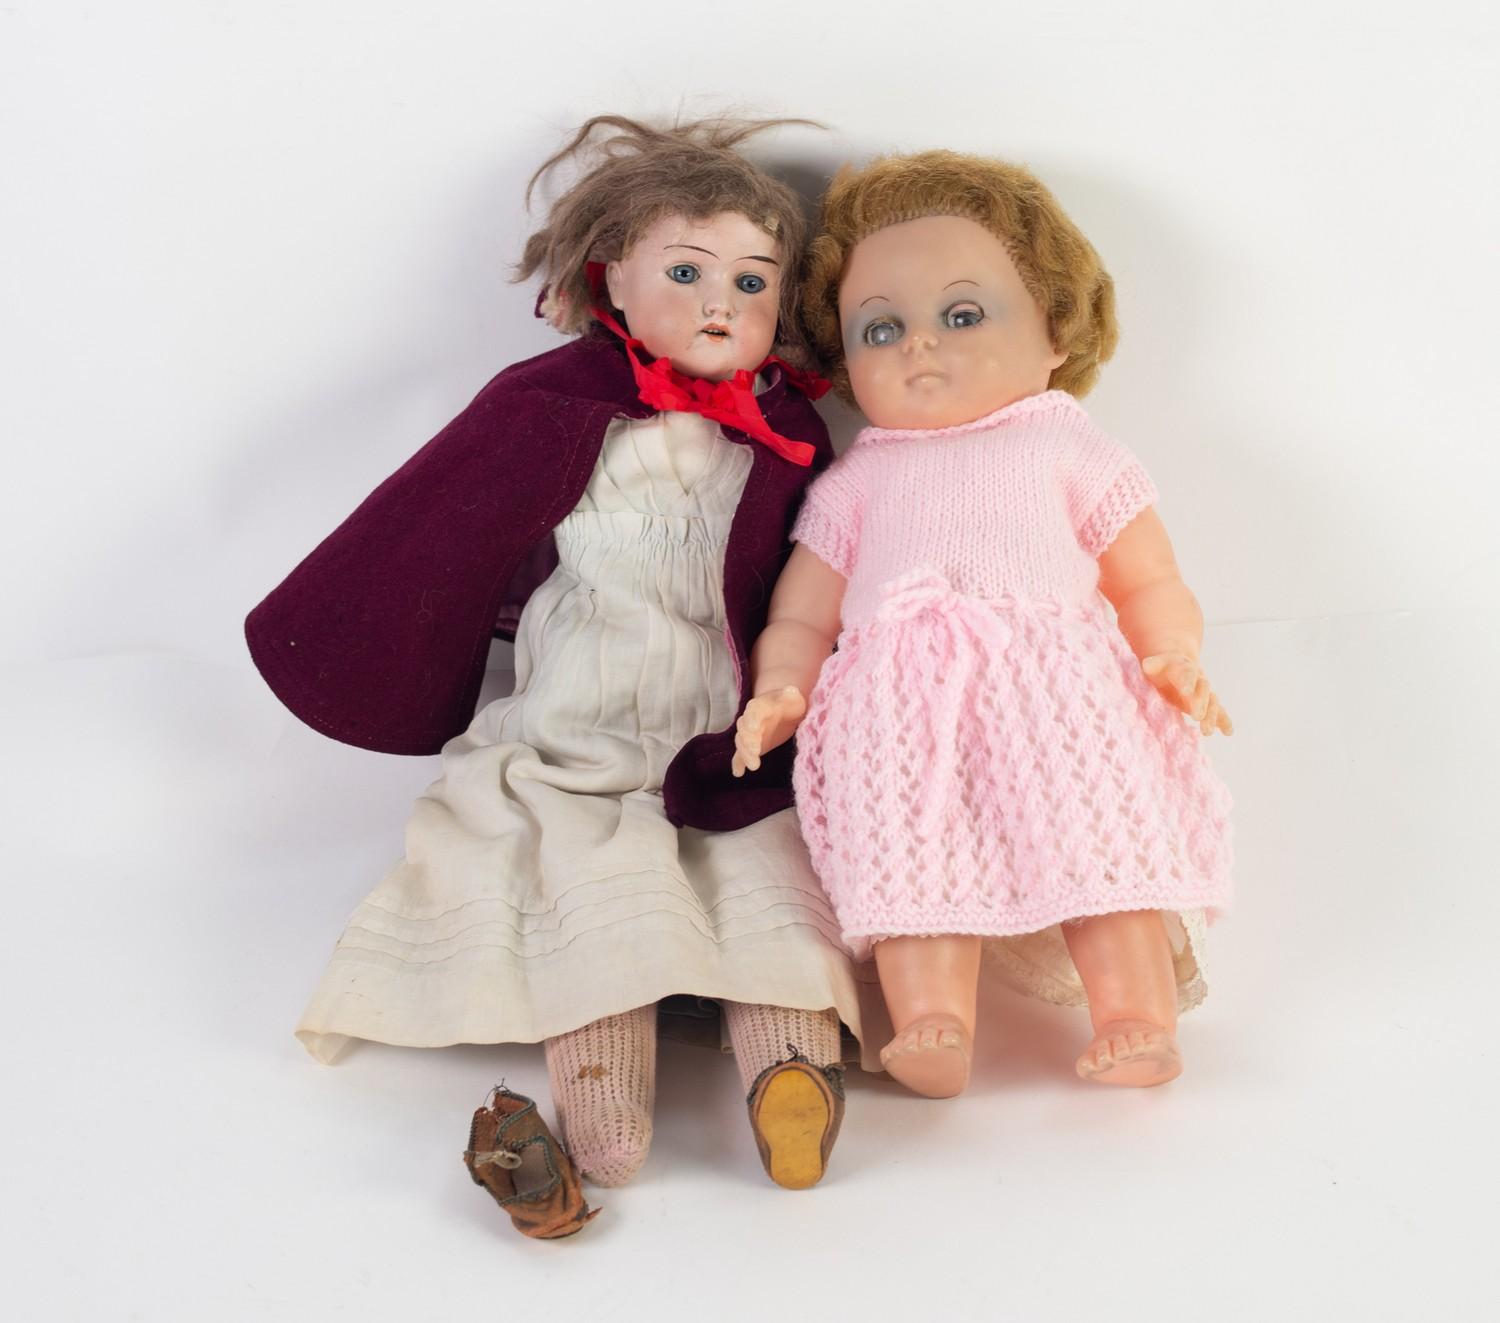 ARMAND MARSEILLE, GERMAN, BISQUE SHOULDER HEADED GIRL DOLL, dressed in nurse's uniform, with natural